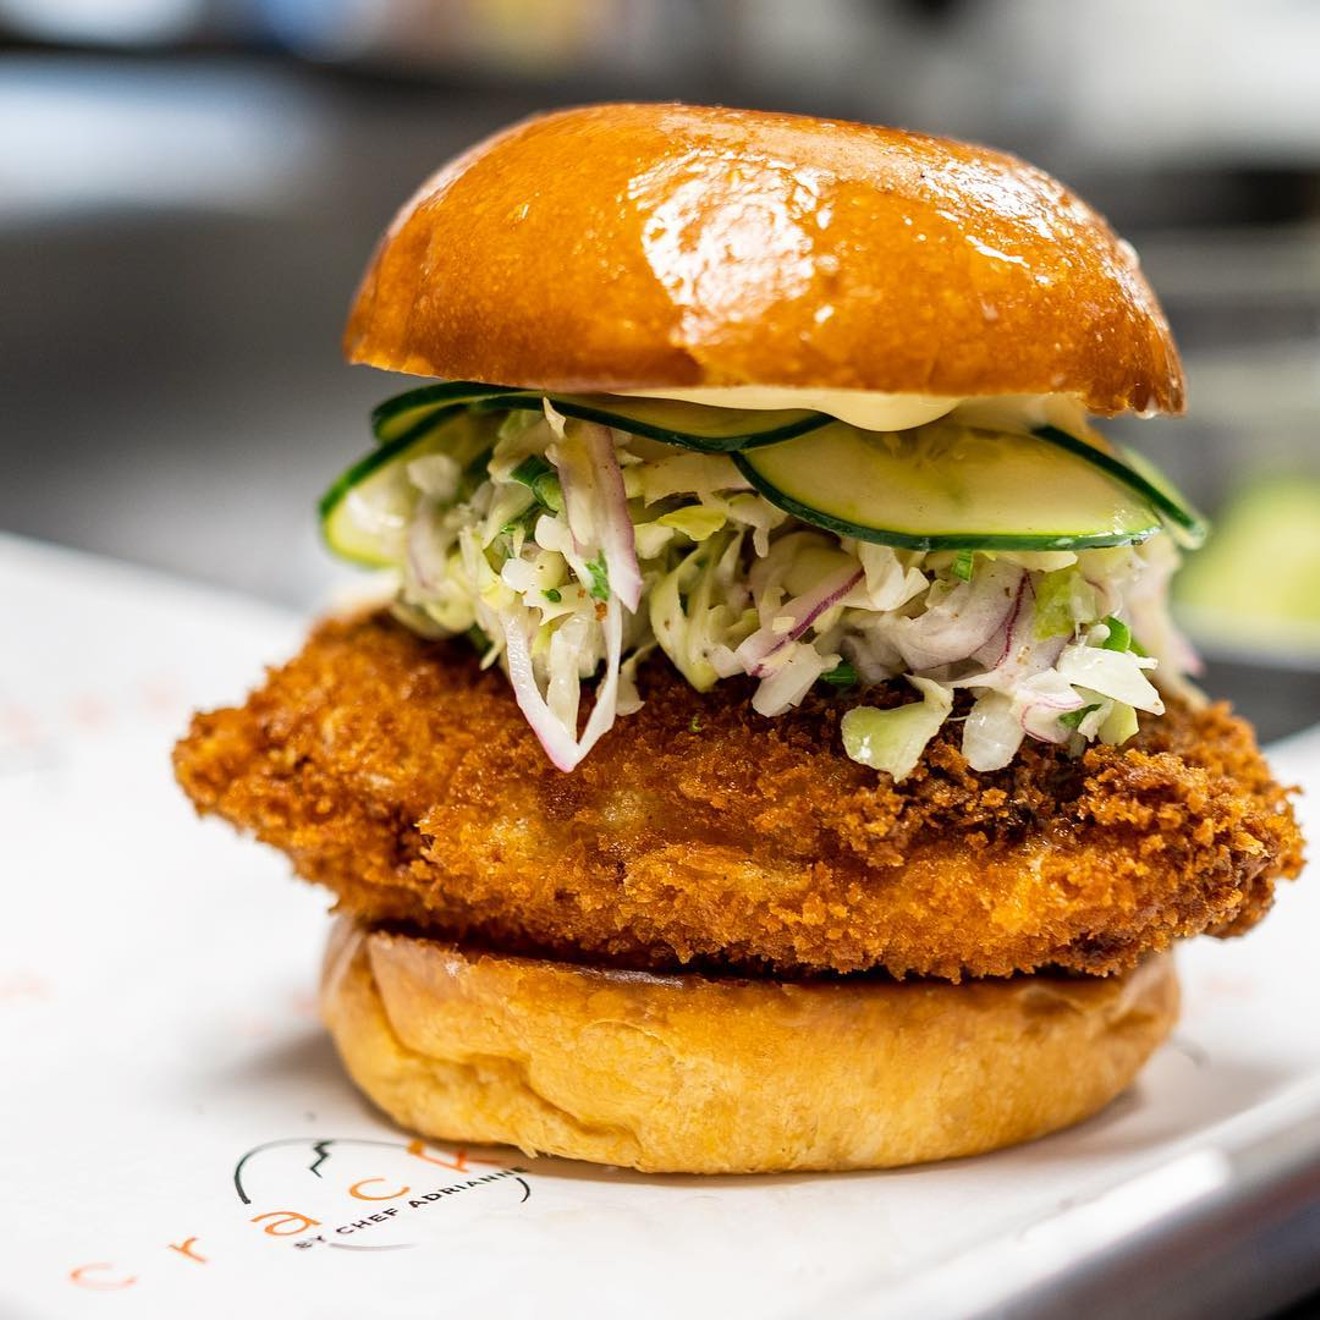 The fried chicken sandwich at Cracked.